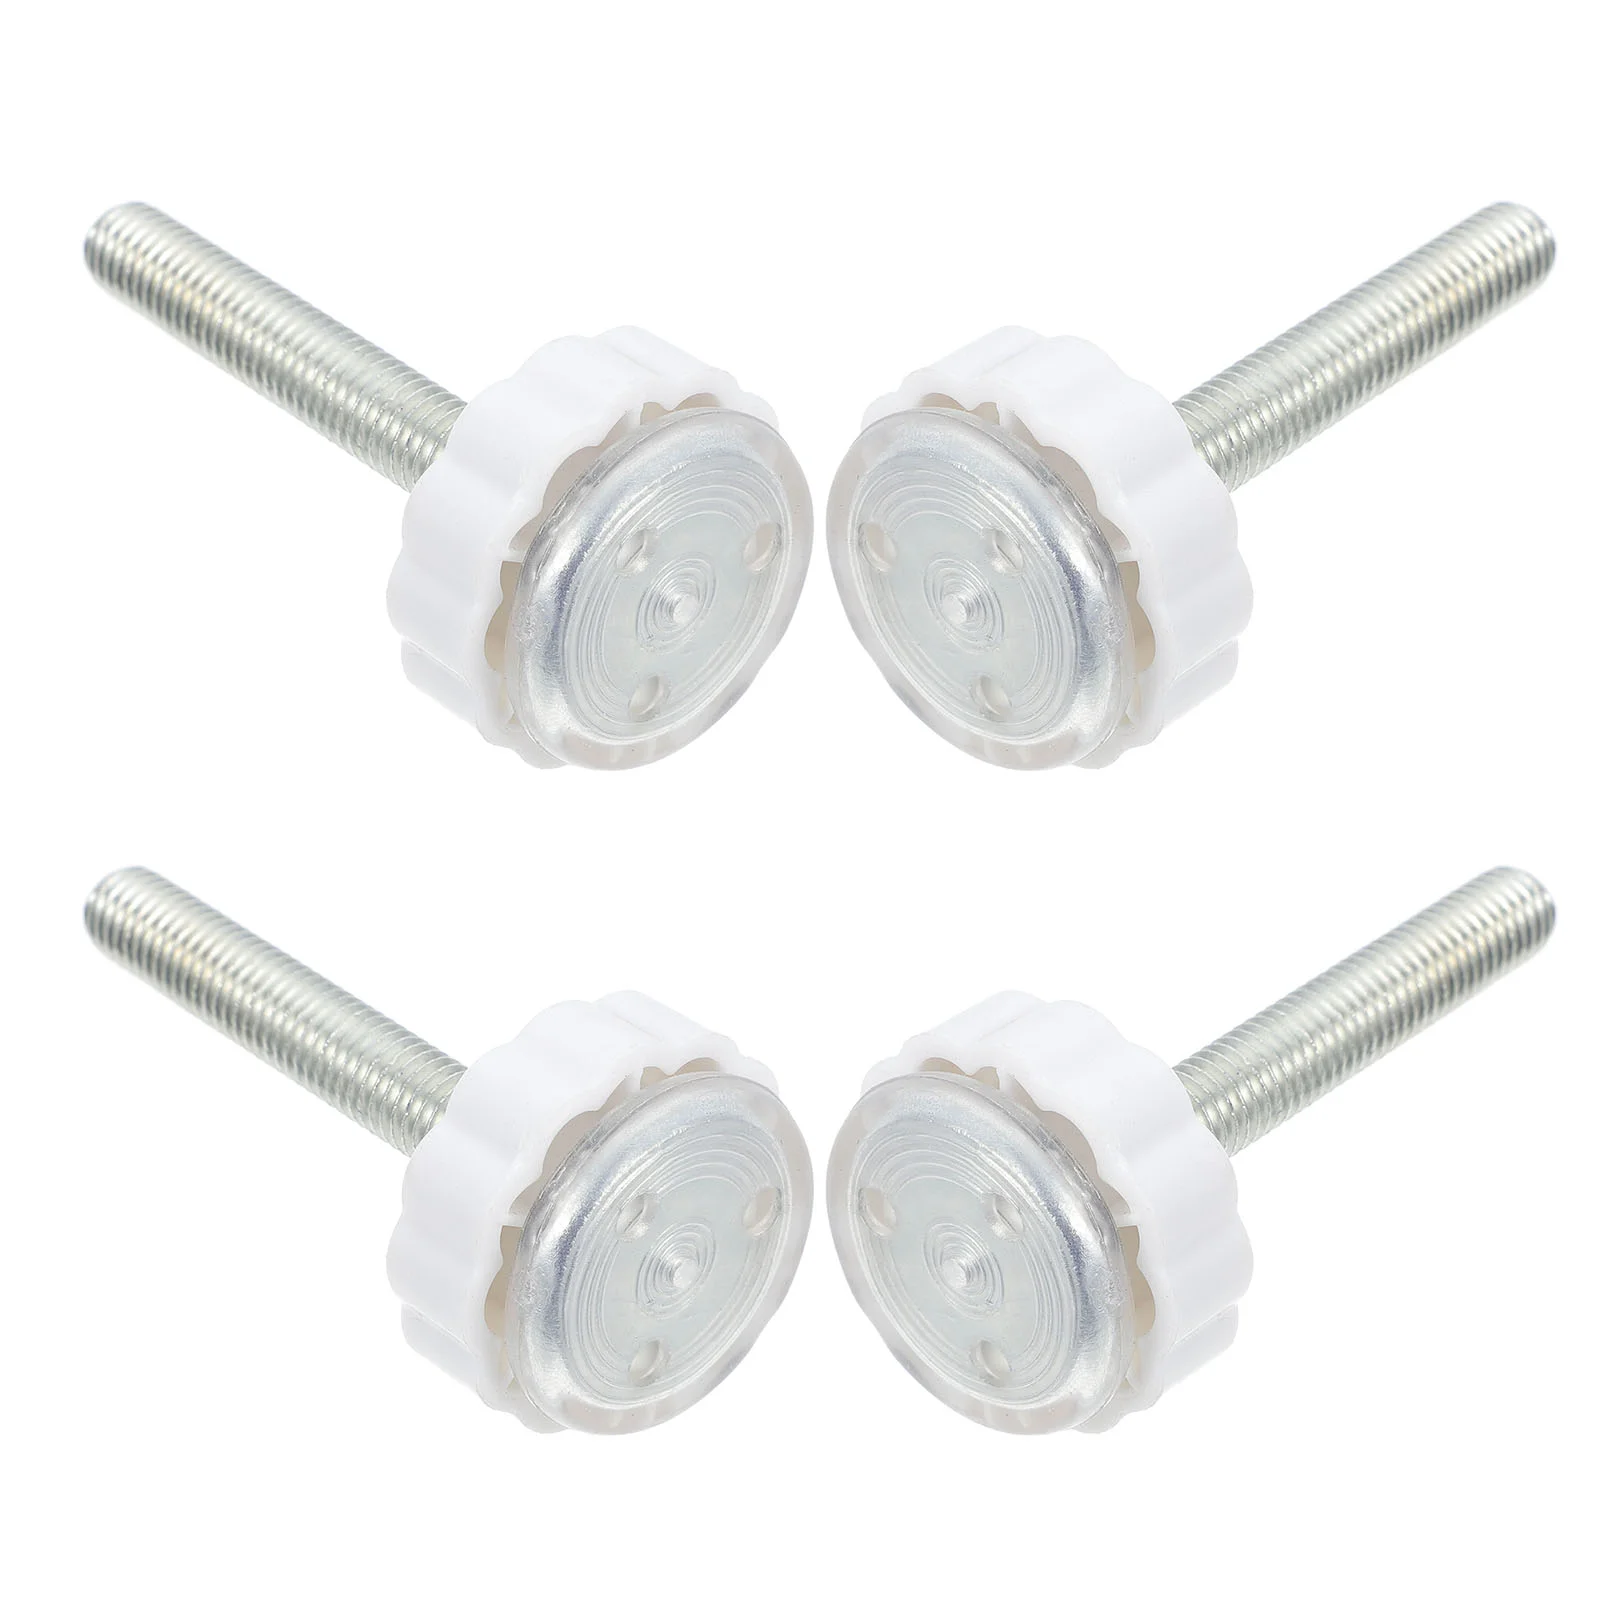 

4 Pcs Fence Kit Bolt Fittings Gate Threaded Spindle Rods Screw Bolts Mounted White Steel Core Dog Gates Accessory Baby